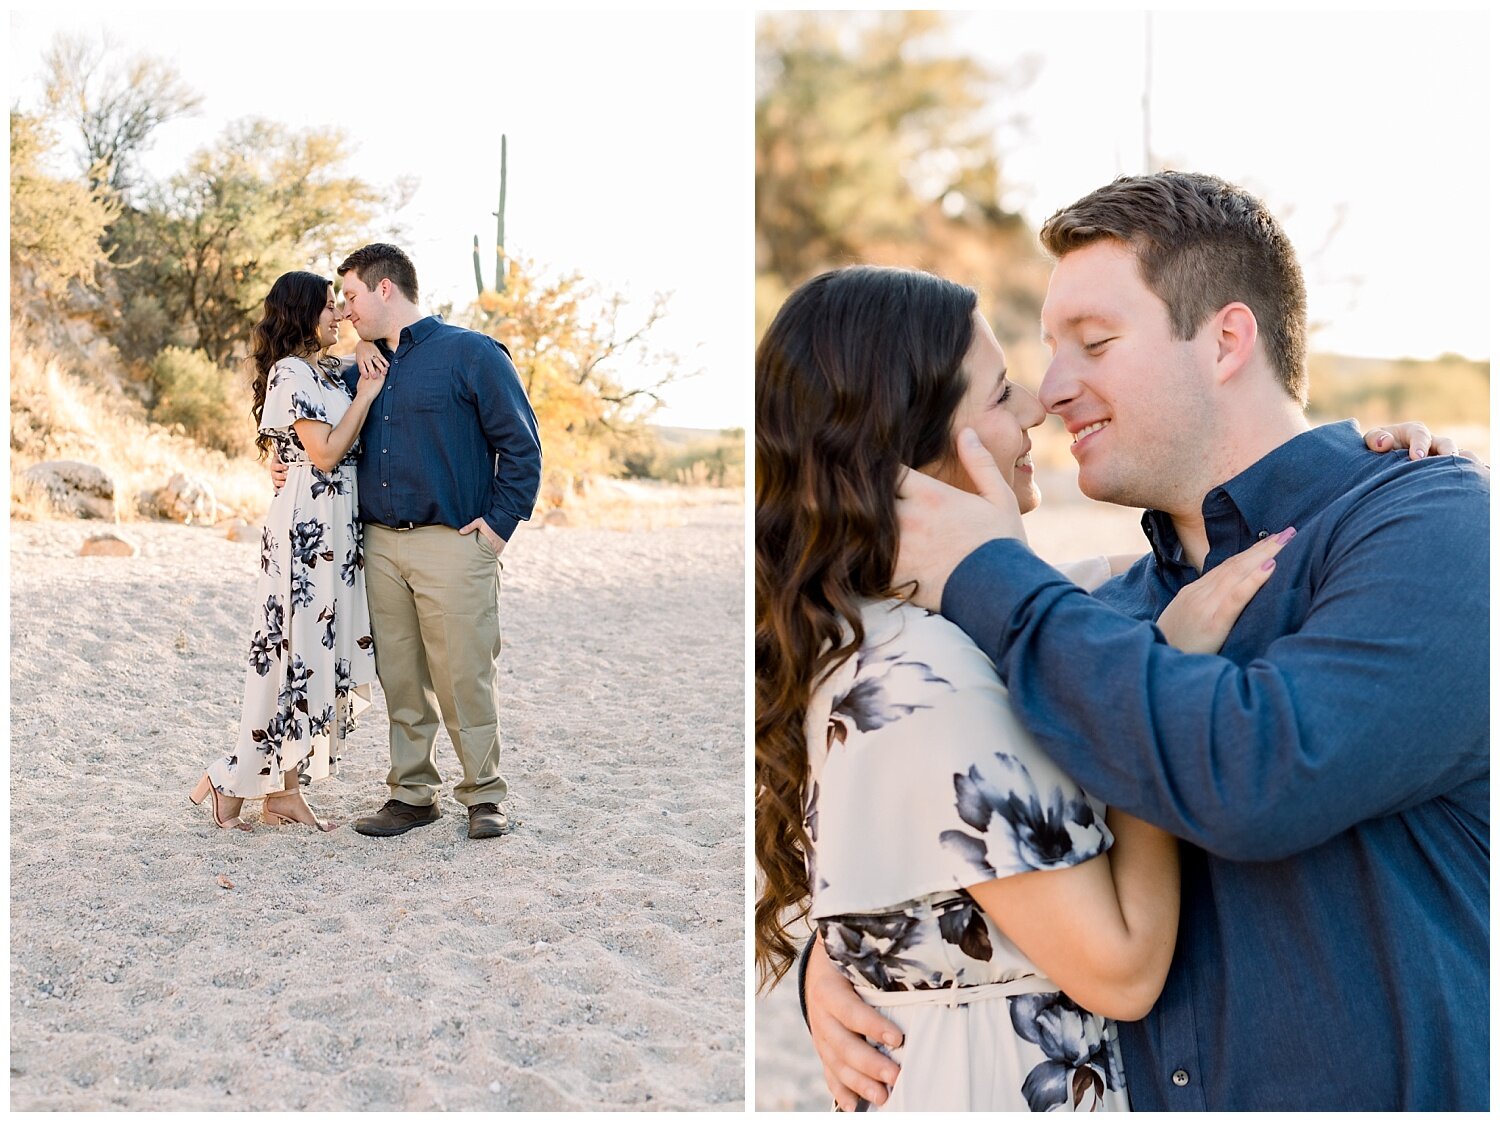 Tucson Engagement Session at Catalina State Park. Couple hold each other close just before they share a romantic kiss.